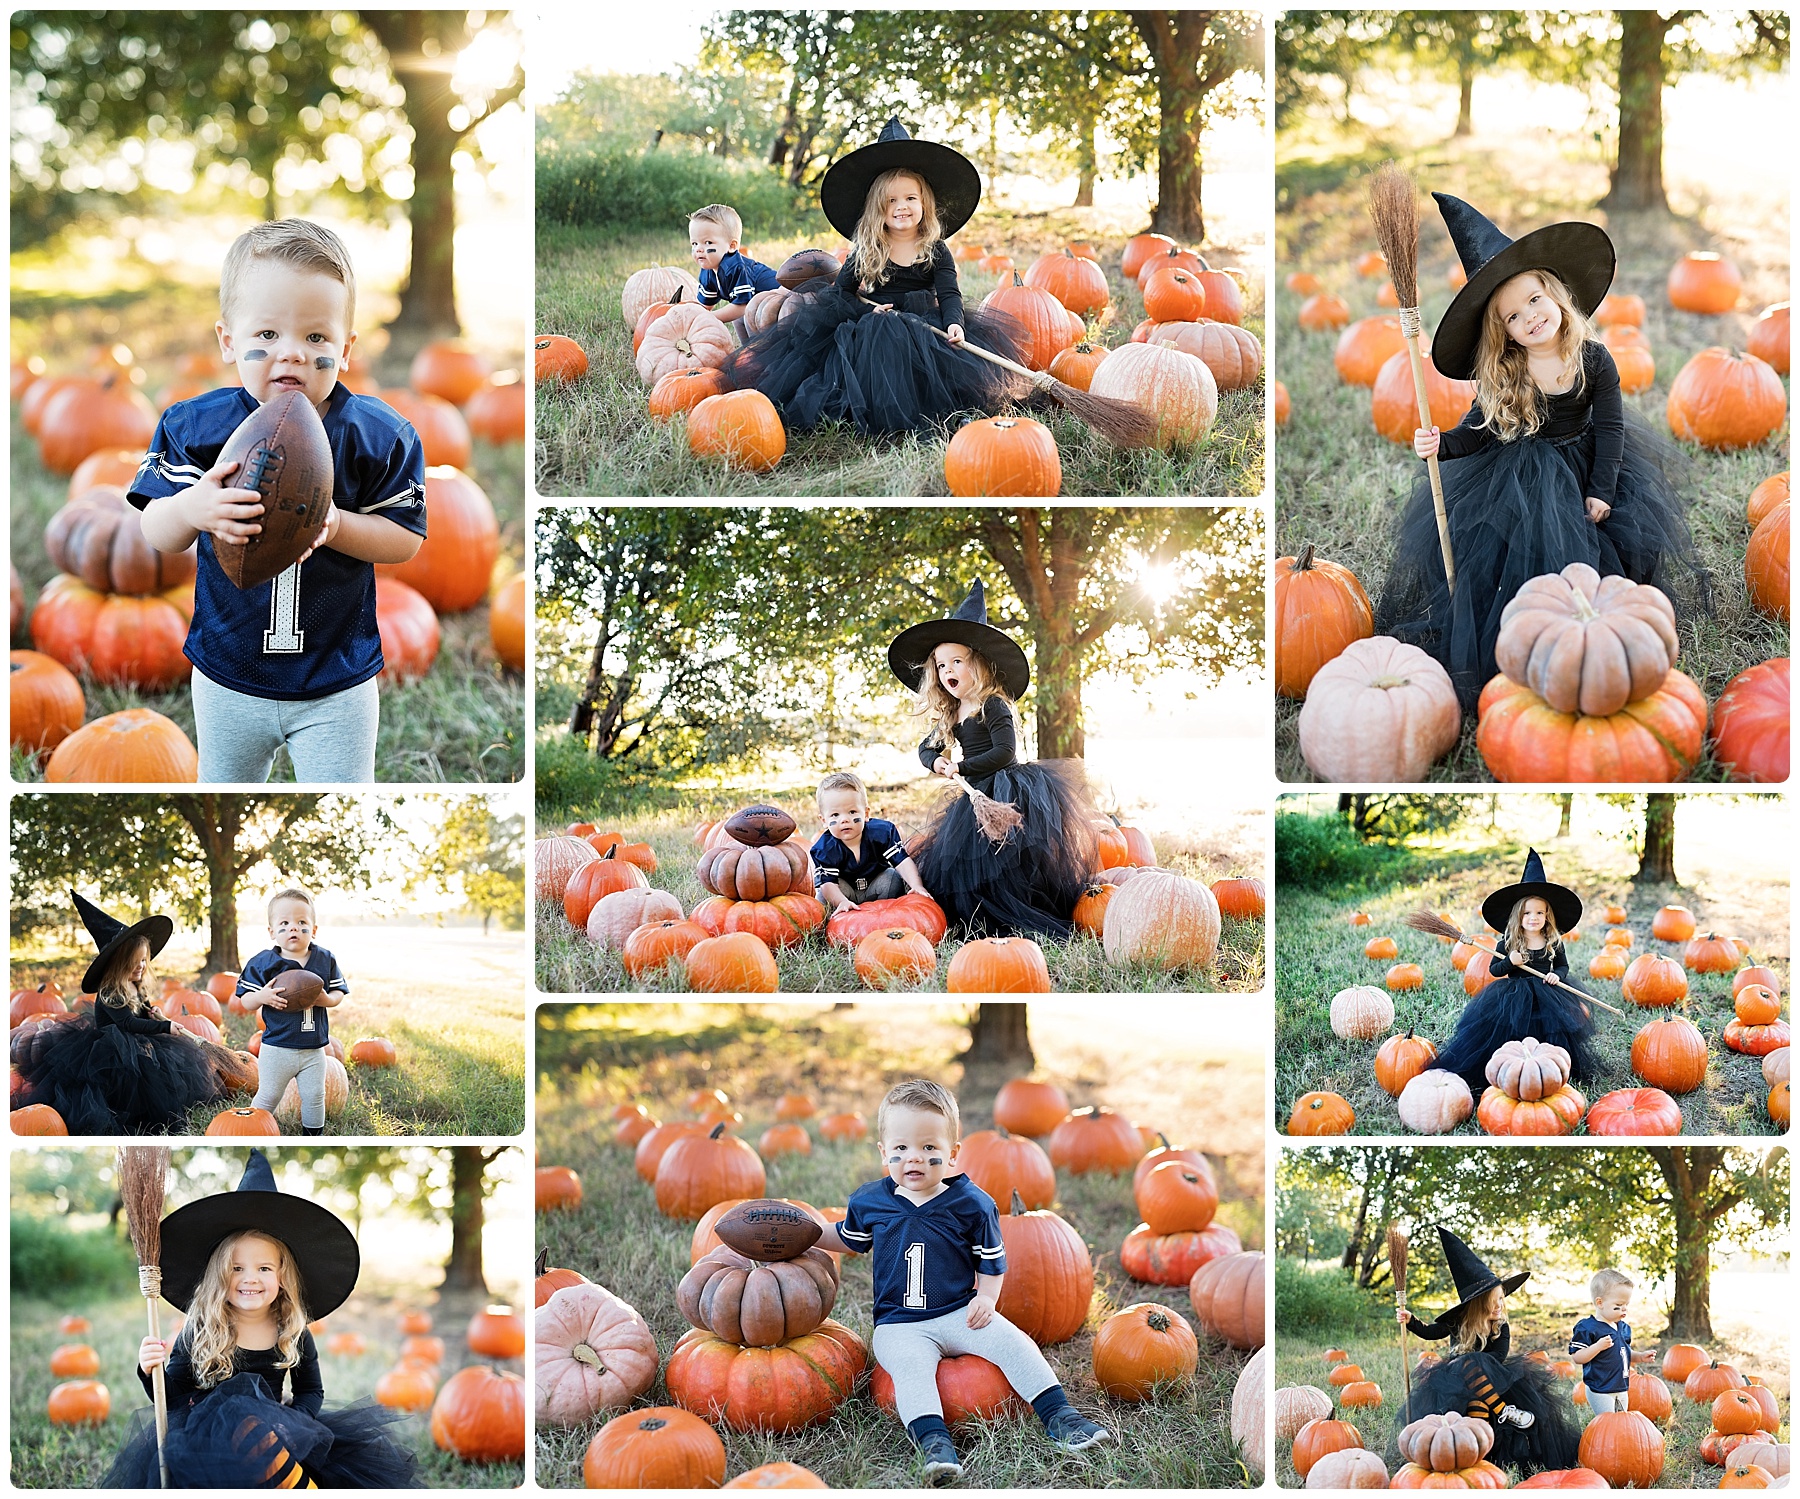 brother and sister in their Halloween costumes in a pumpkin patch